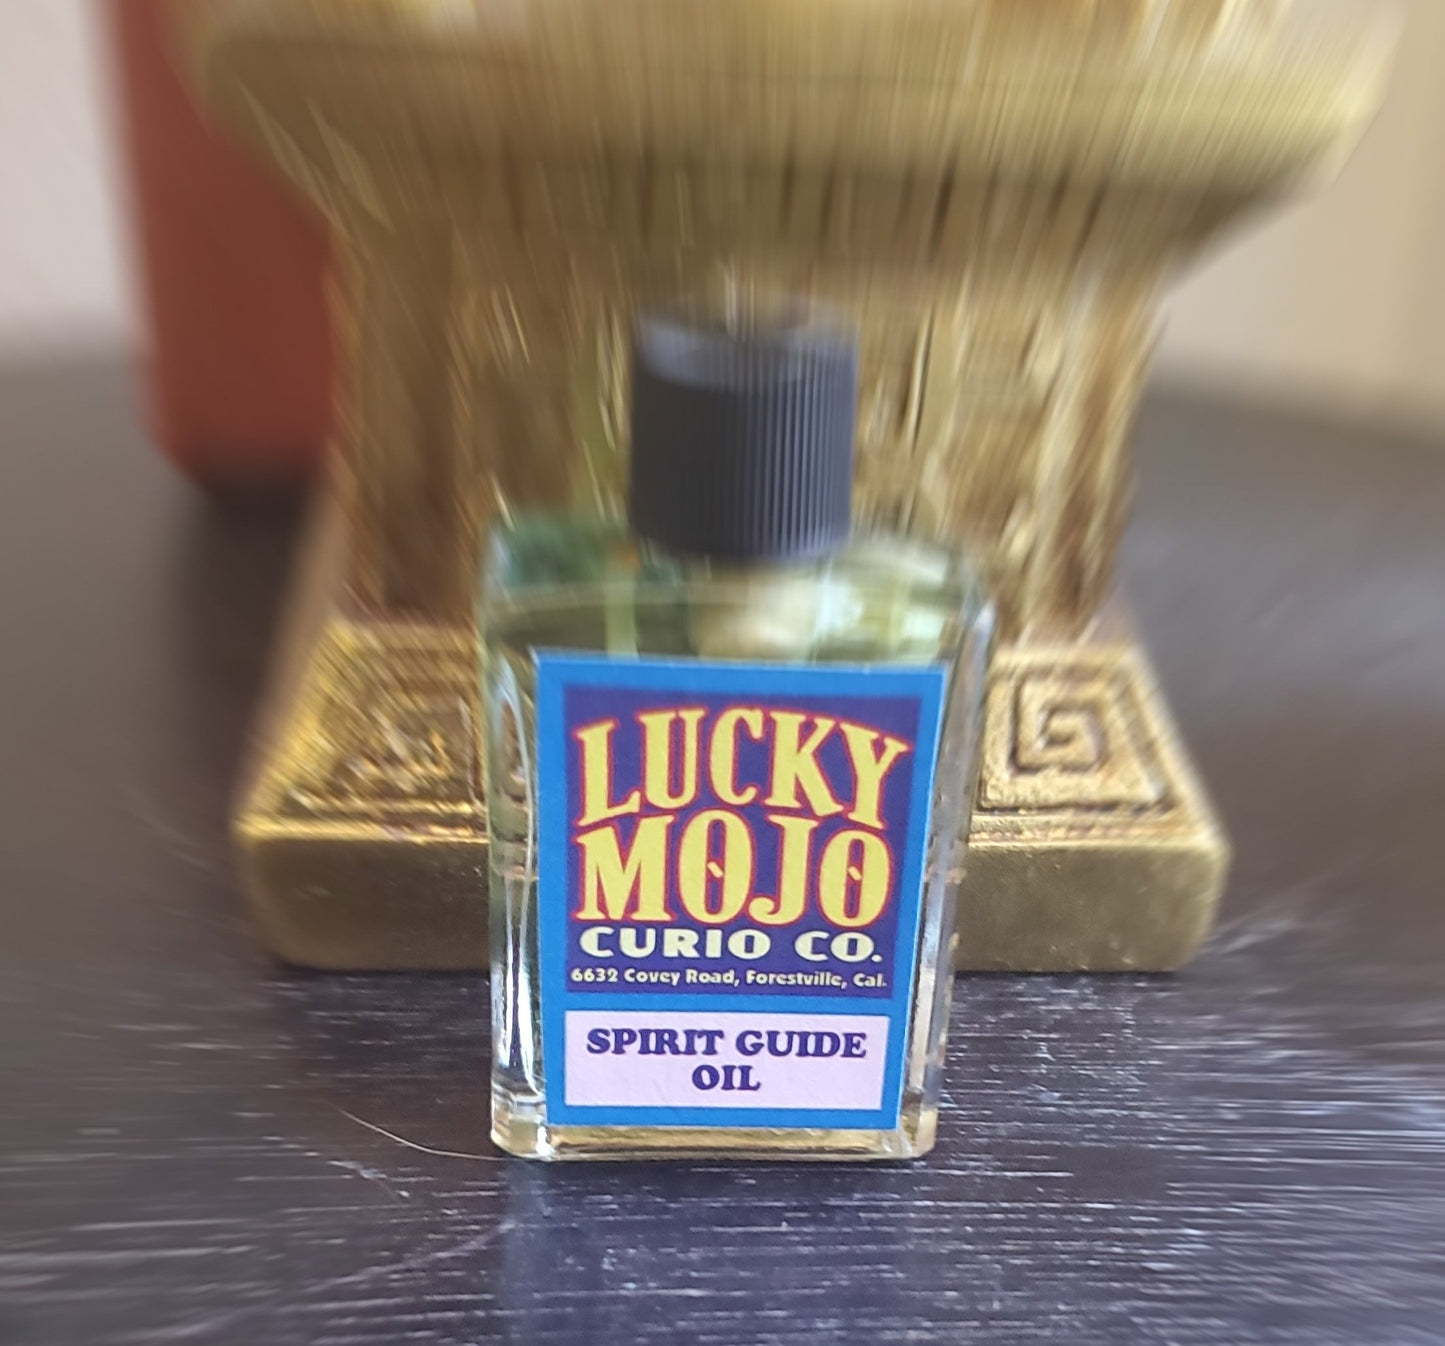 LuckyMojoCurioCo "Spirit Guide Oil" Anointing / Conjure Oil #GreatDeal #LuckyMojoCurioCo #LuckyMojo #EffectiveOils #MustHave